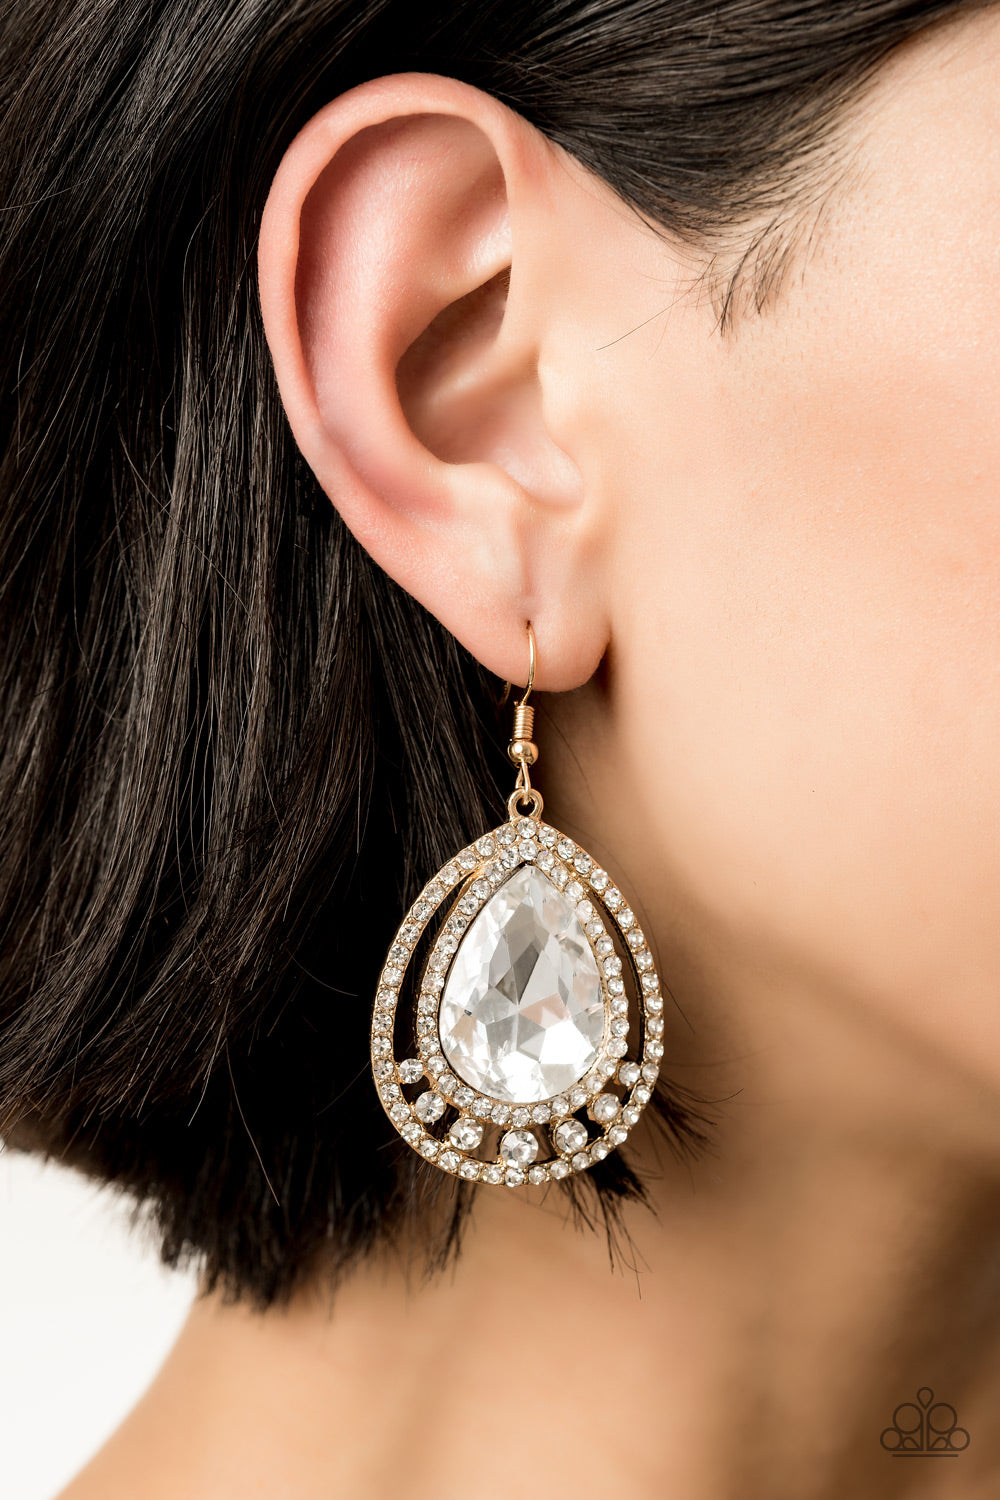 Paparazzi All Rise For Her Majesty - Gold Rhinestone Earrings - A Finishing Touch 